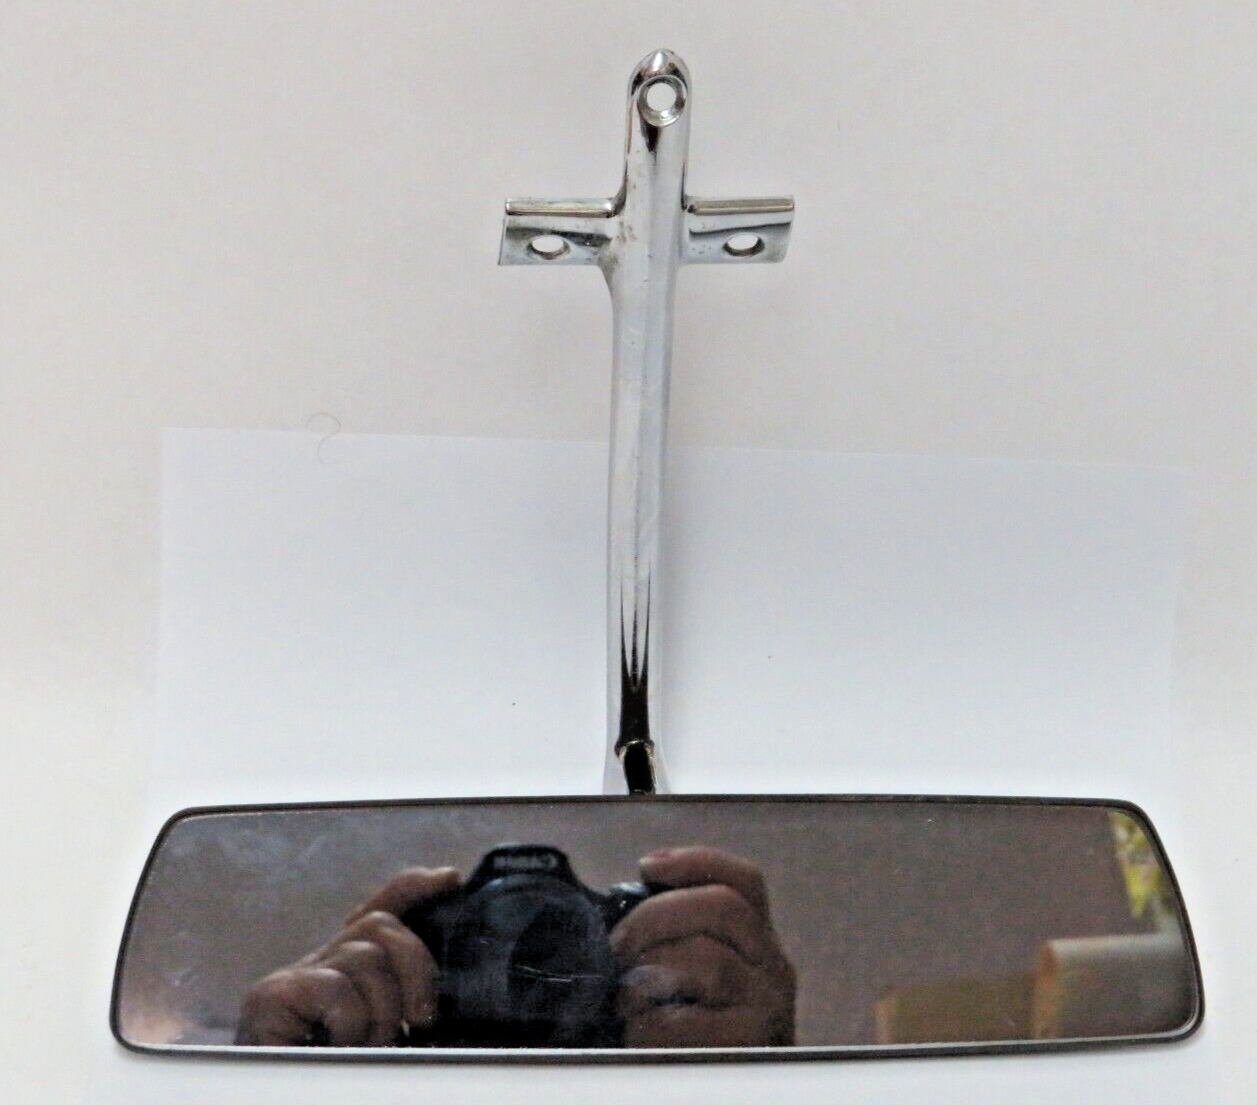 1960s Chevy Corvair Long Arm Vintage Rear View Mirror #6274